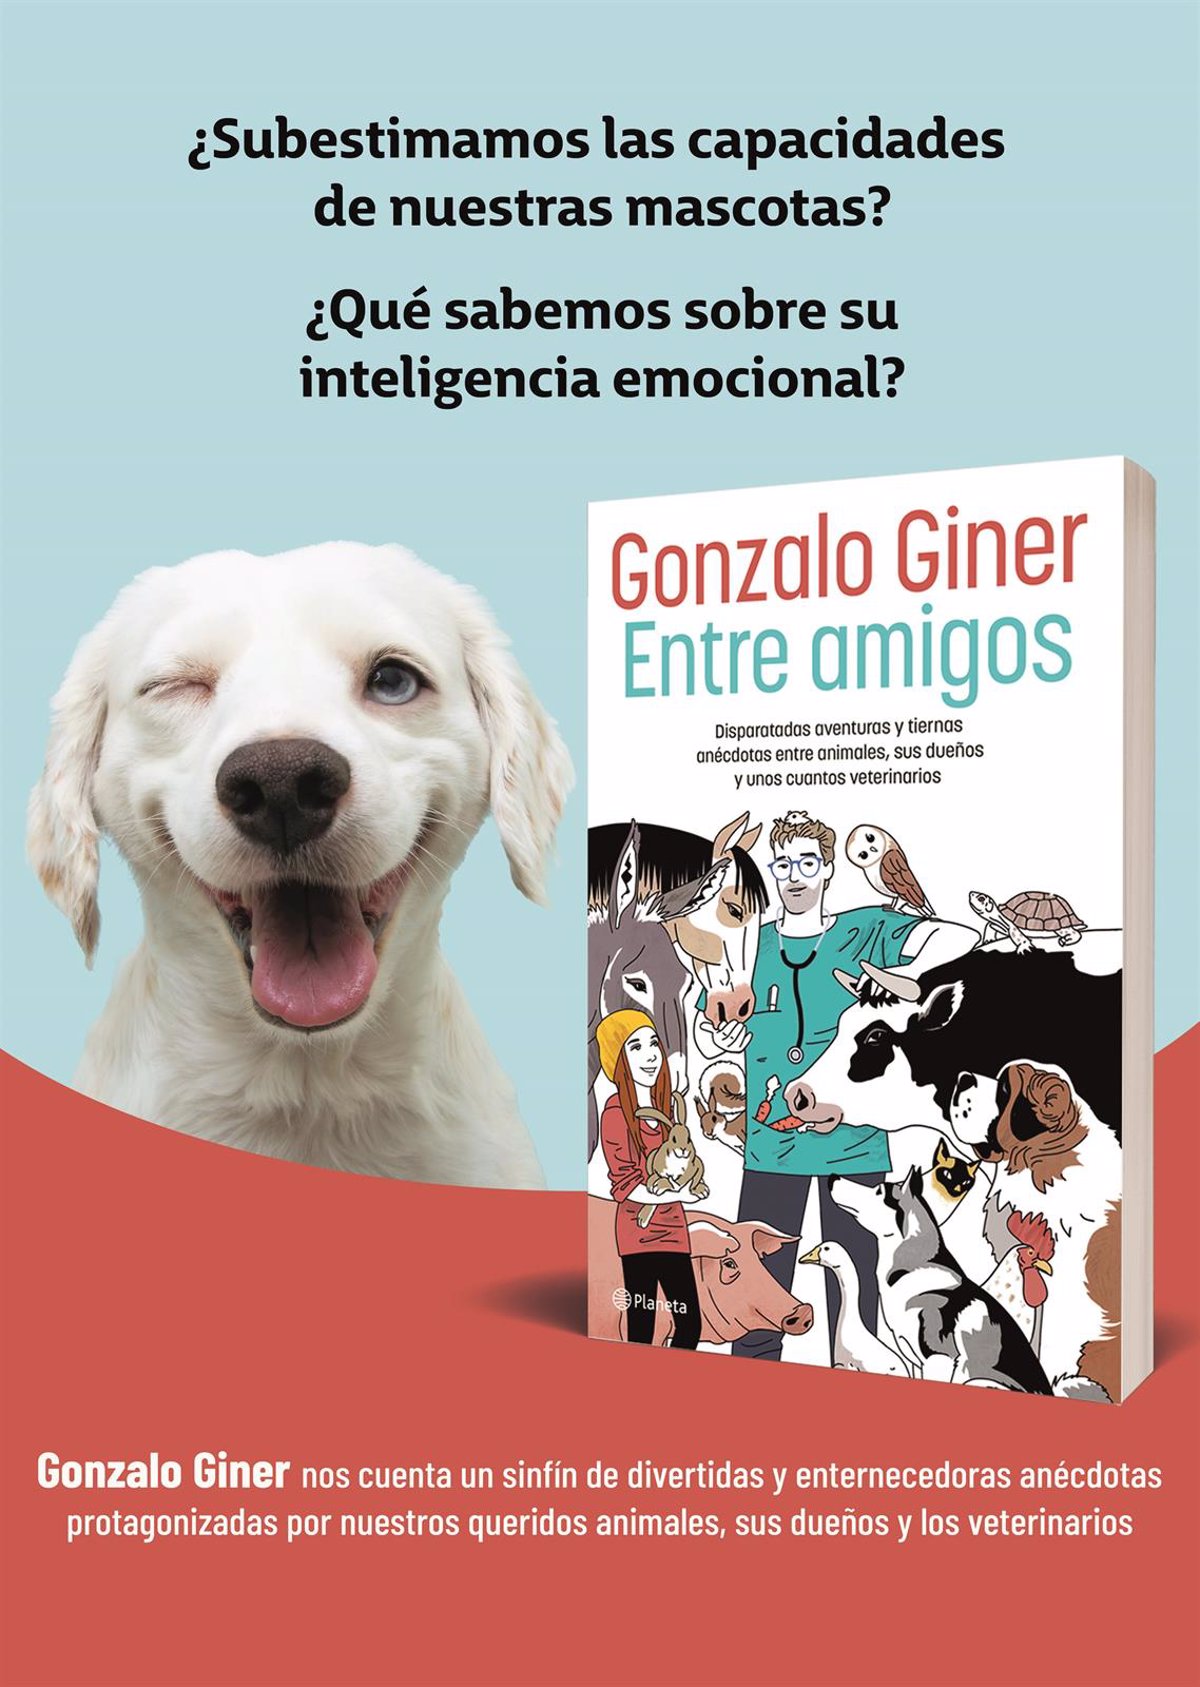 Gonzalo Giner publishes ‘Among friends’, a collective anecdote on what it means to be a veterinarian